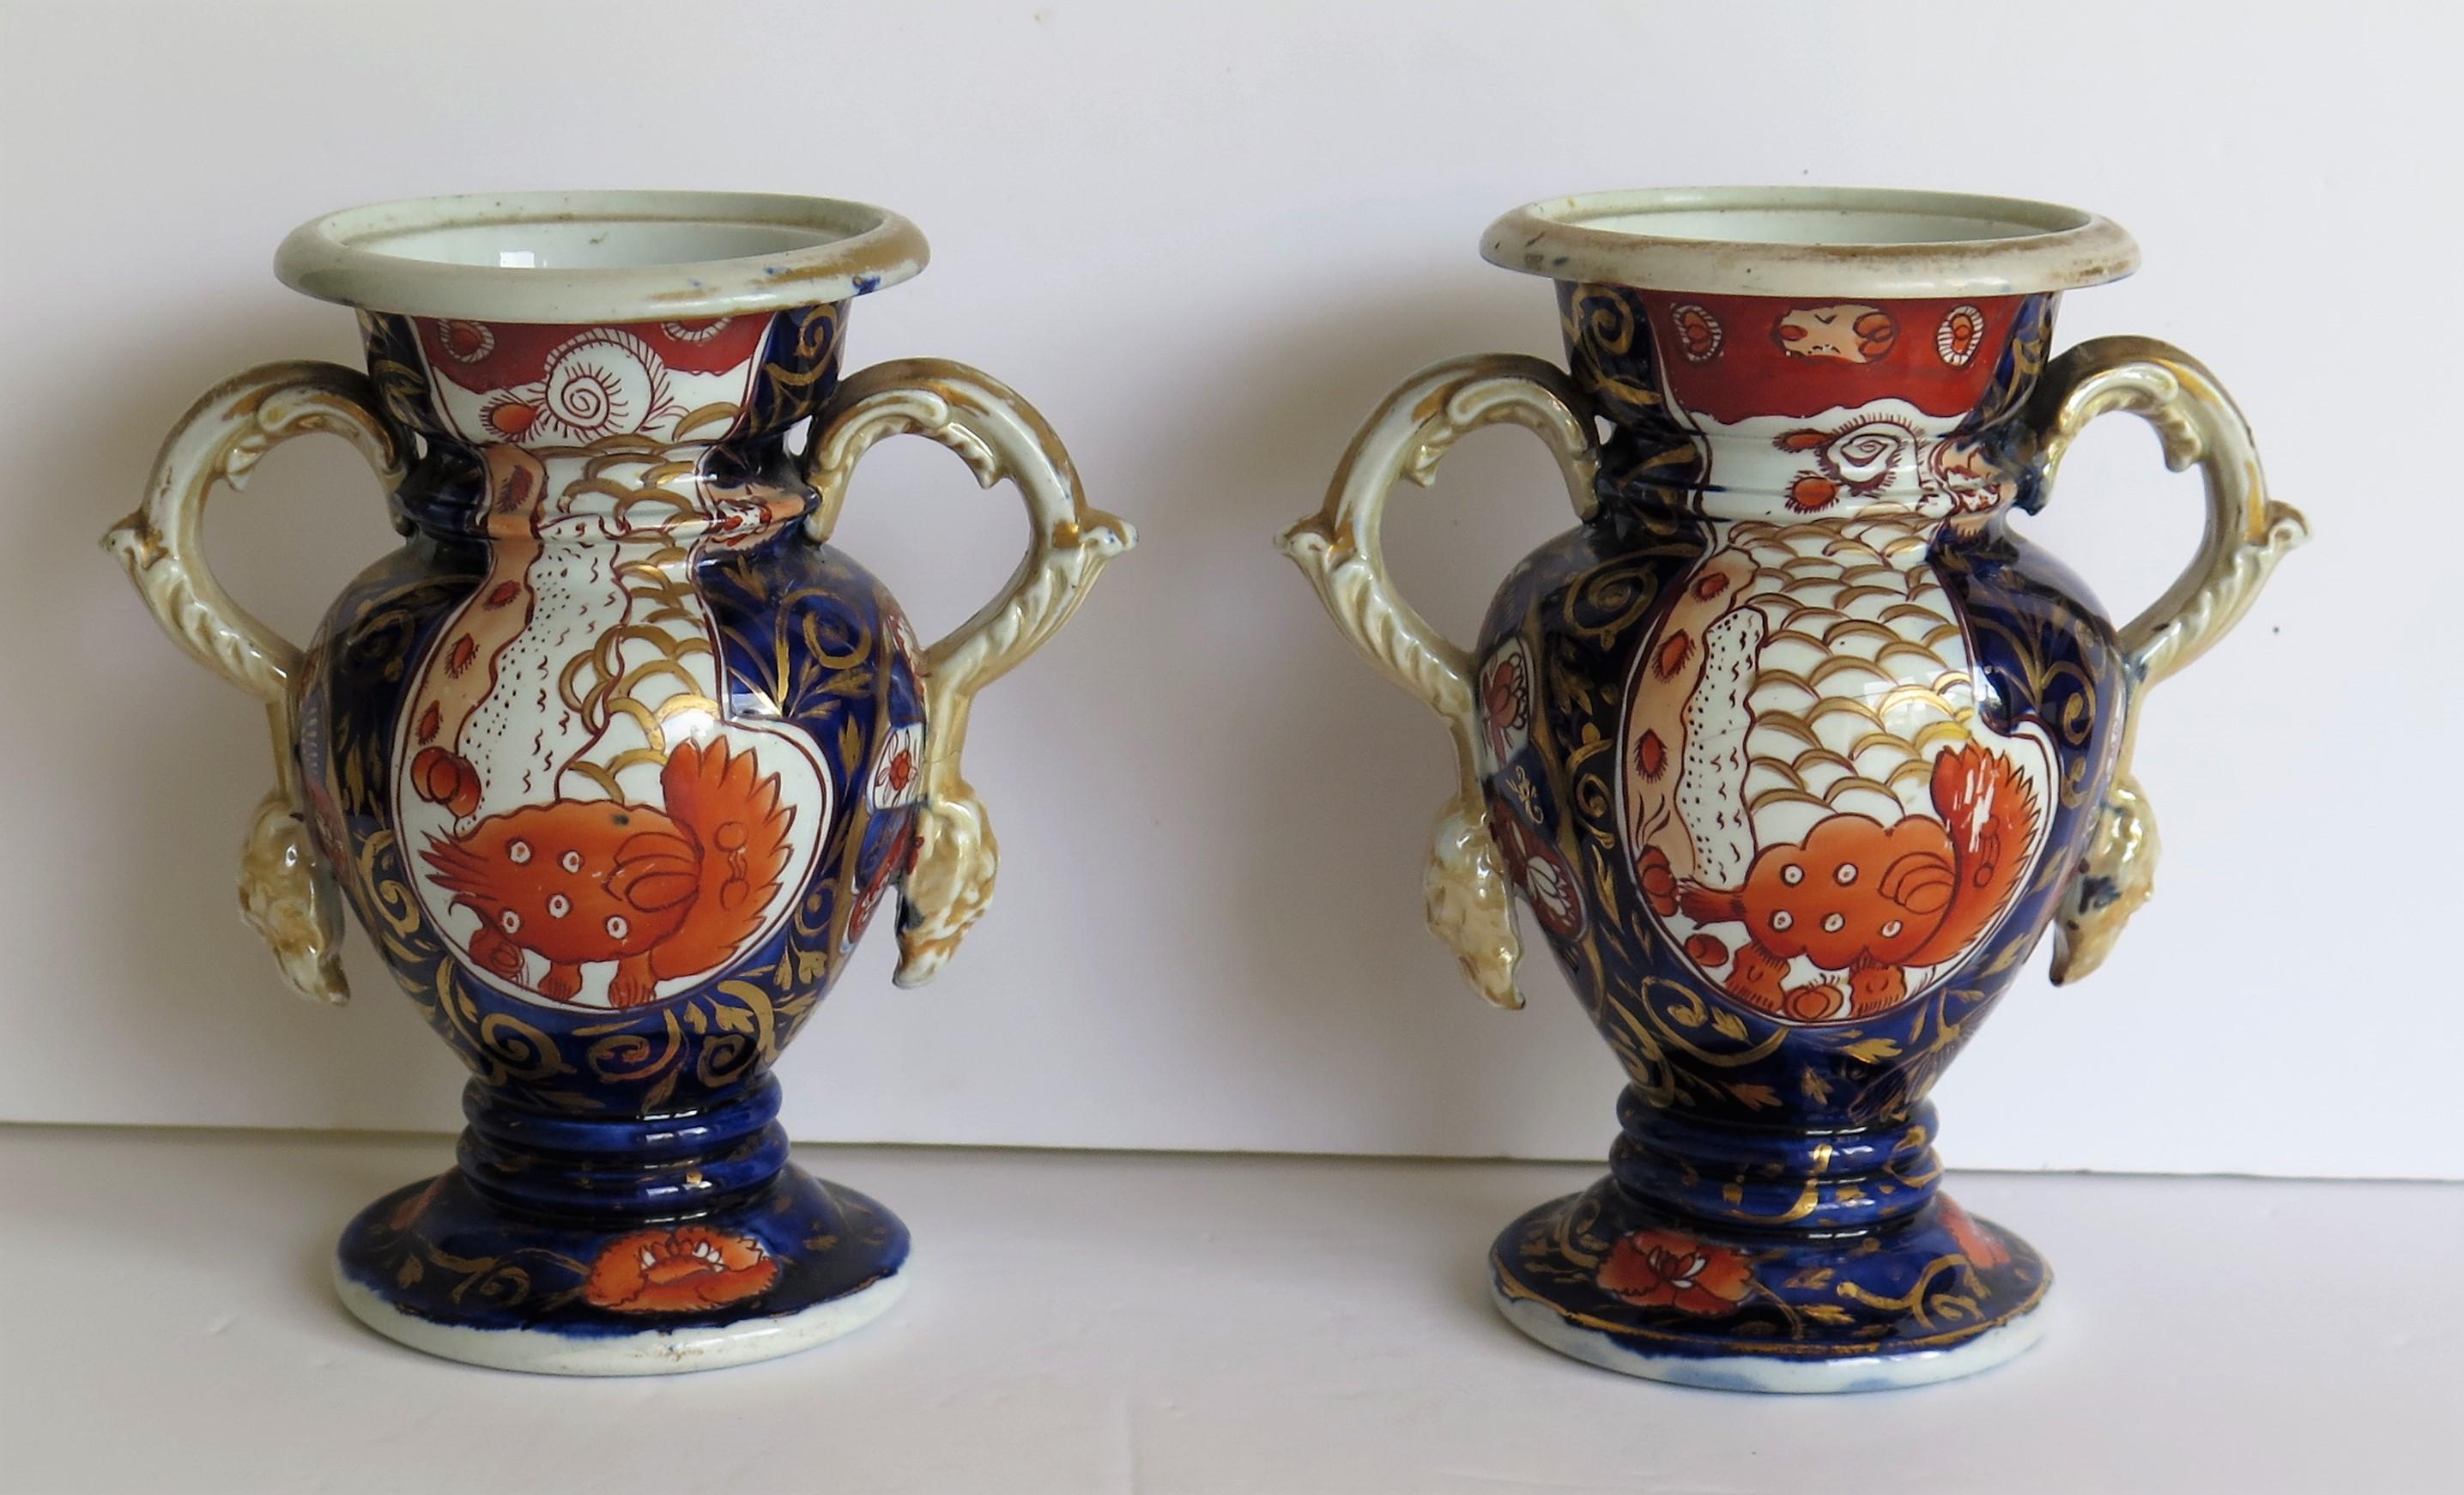 This is a rare pair of very decorative Vases in the Elephant's Foot pattern, made by Mason's Ironstone, of Lane Delph, Staffordshire, England, in the early 19th century, circa 1820

The vases have a baluster shape raised on a circular ring knopped